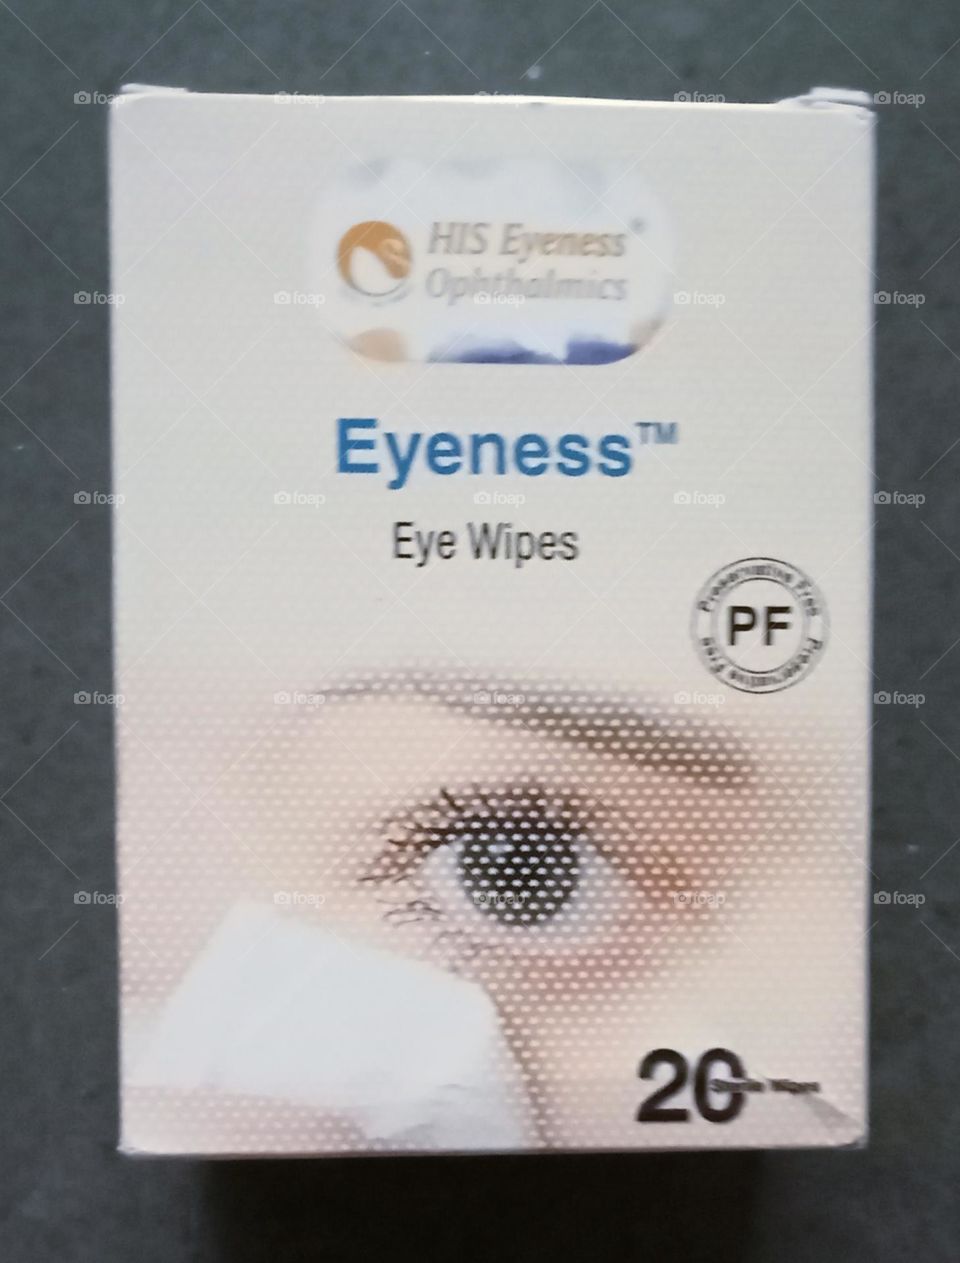 This picture is Eyeness, eye wipes. This eye drops medicine box is in rectangle shapes. The medicine box came in Rectangular shape.